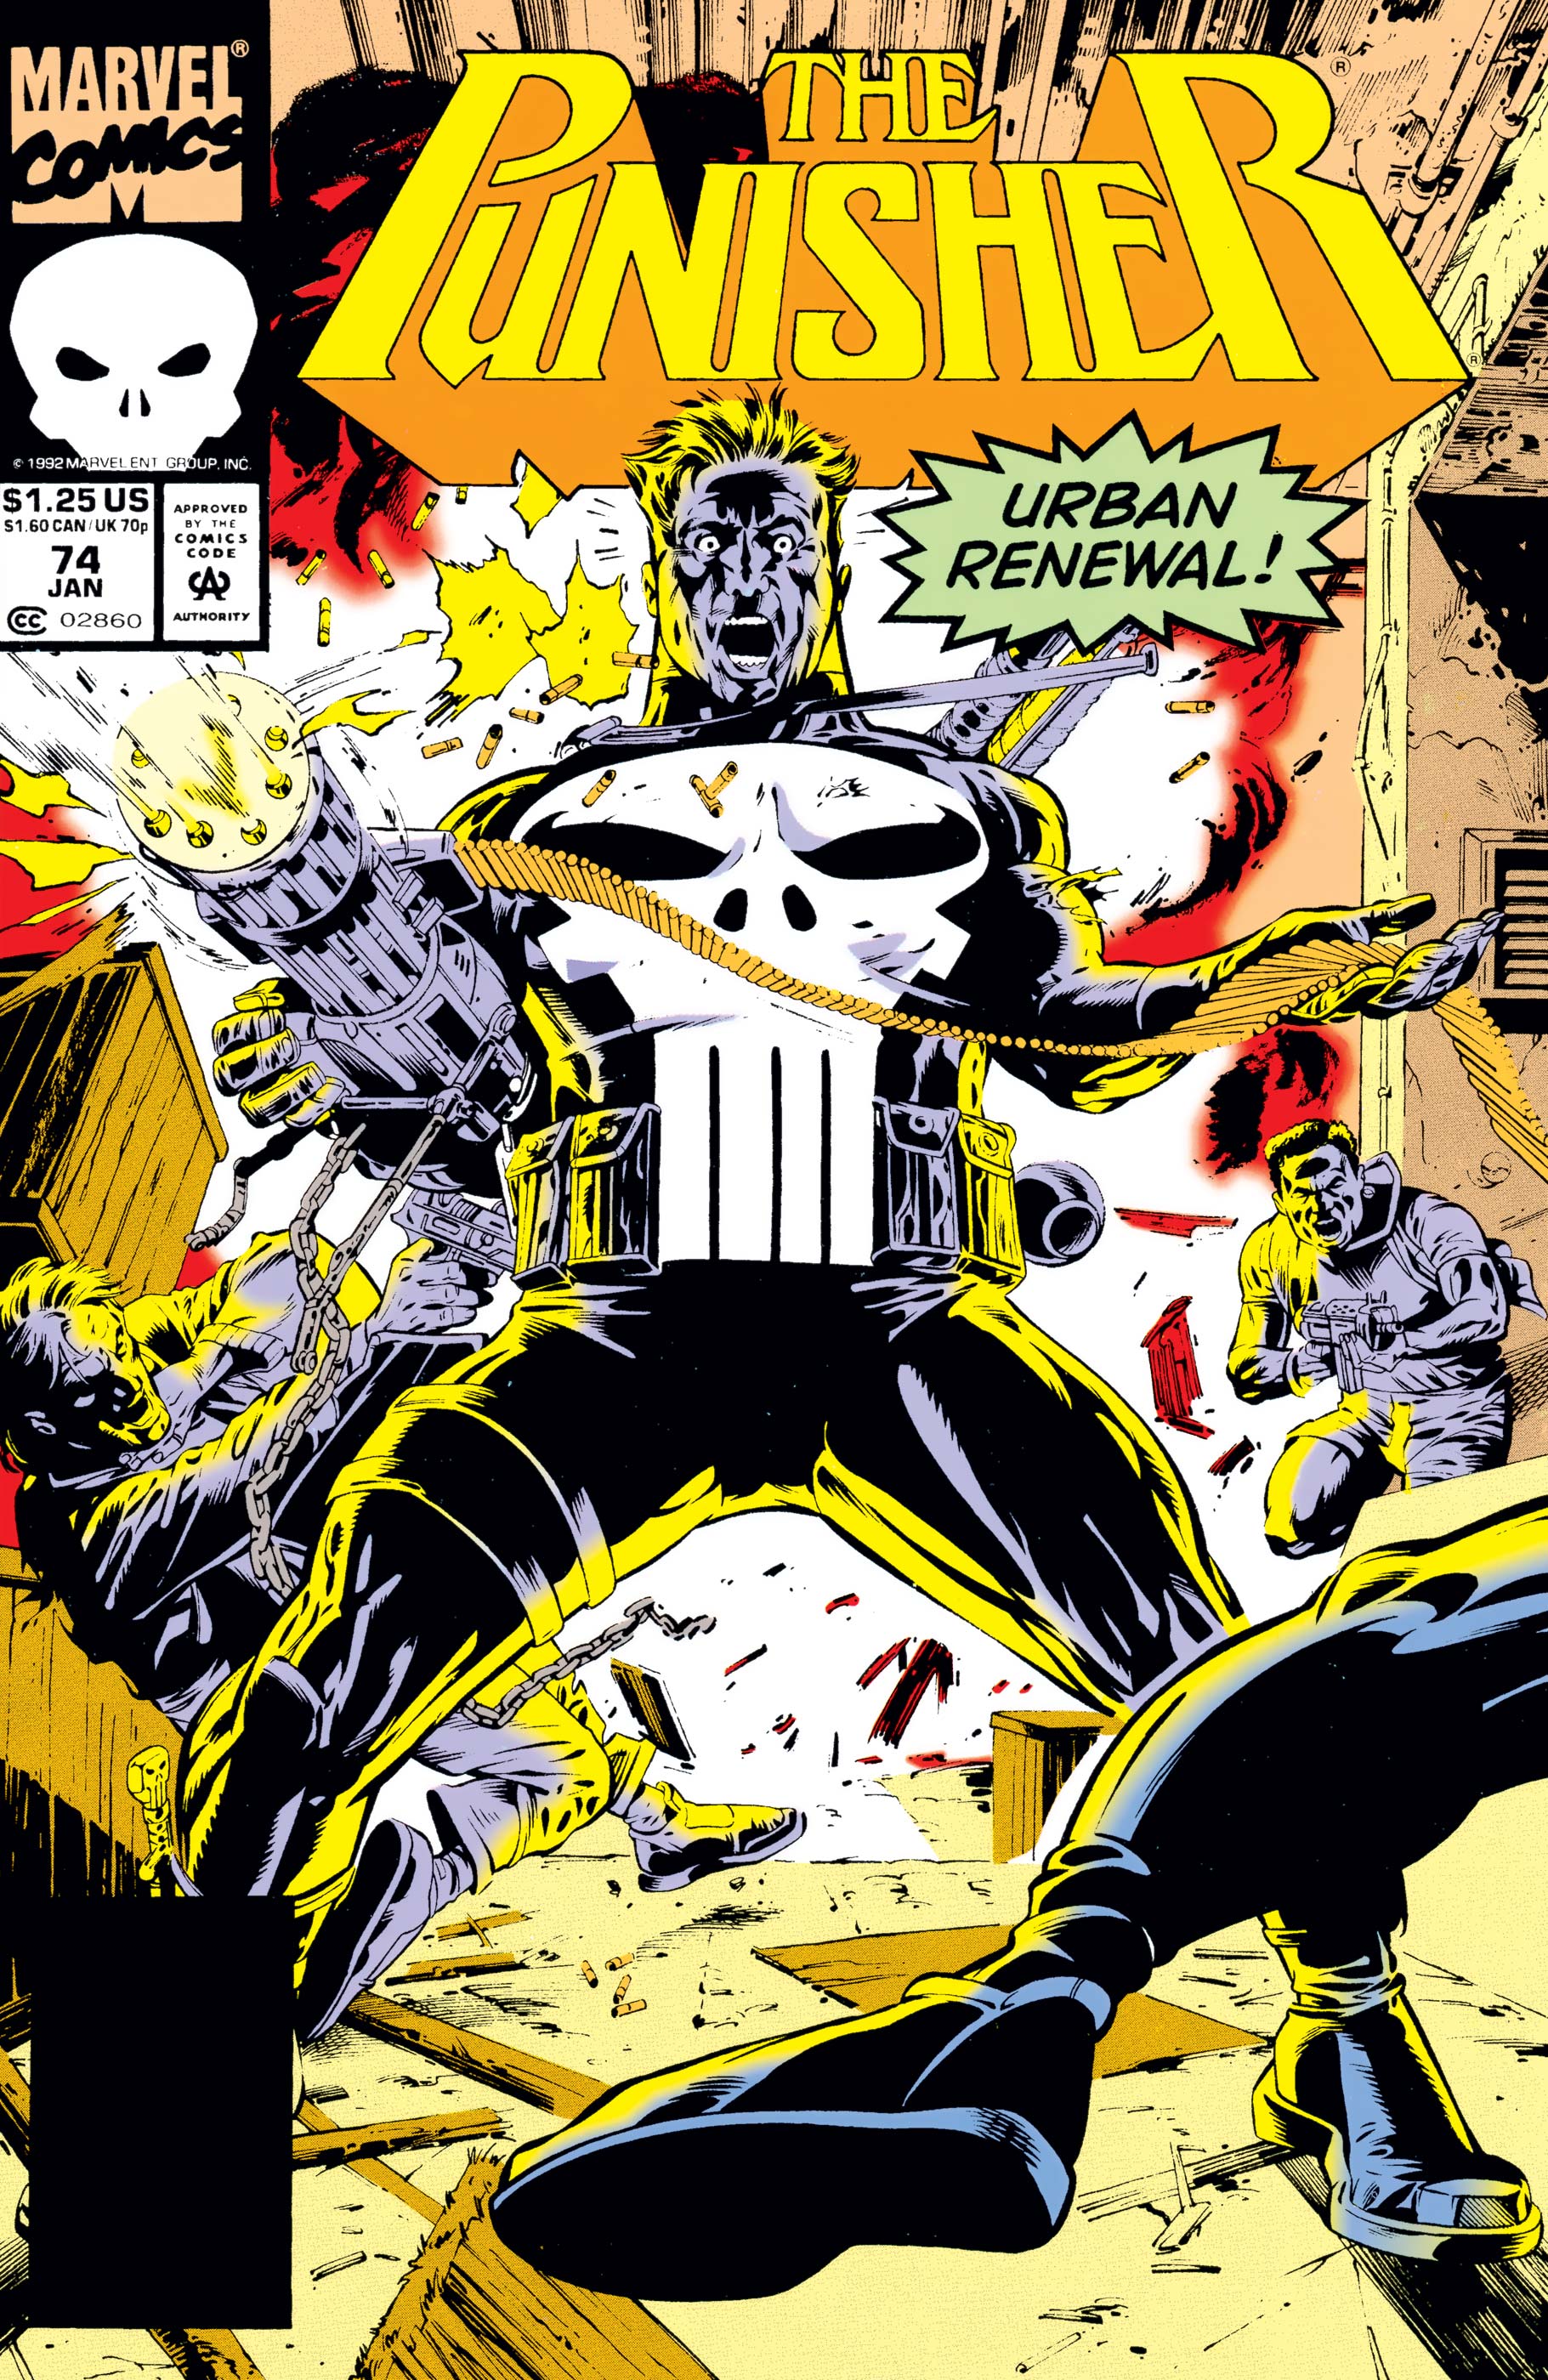 The Punisher (1987) #74